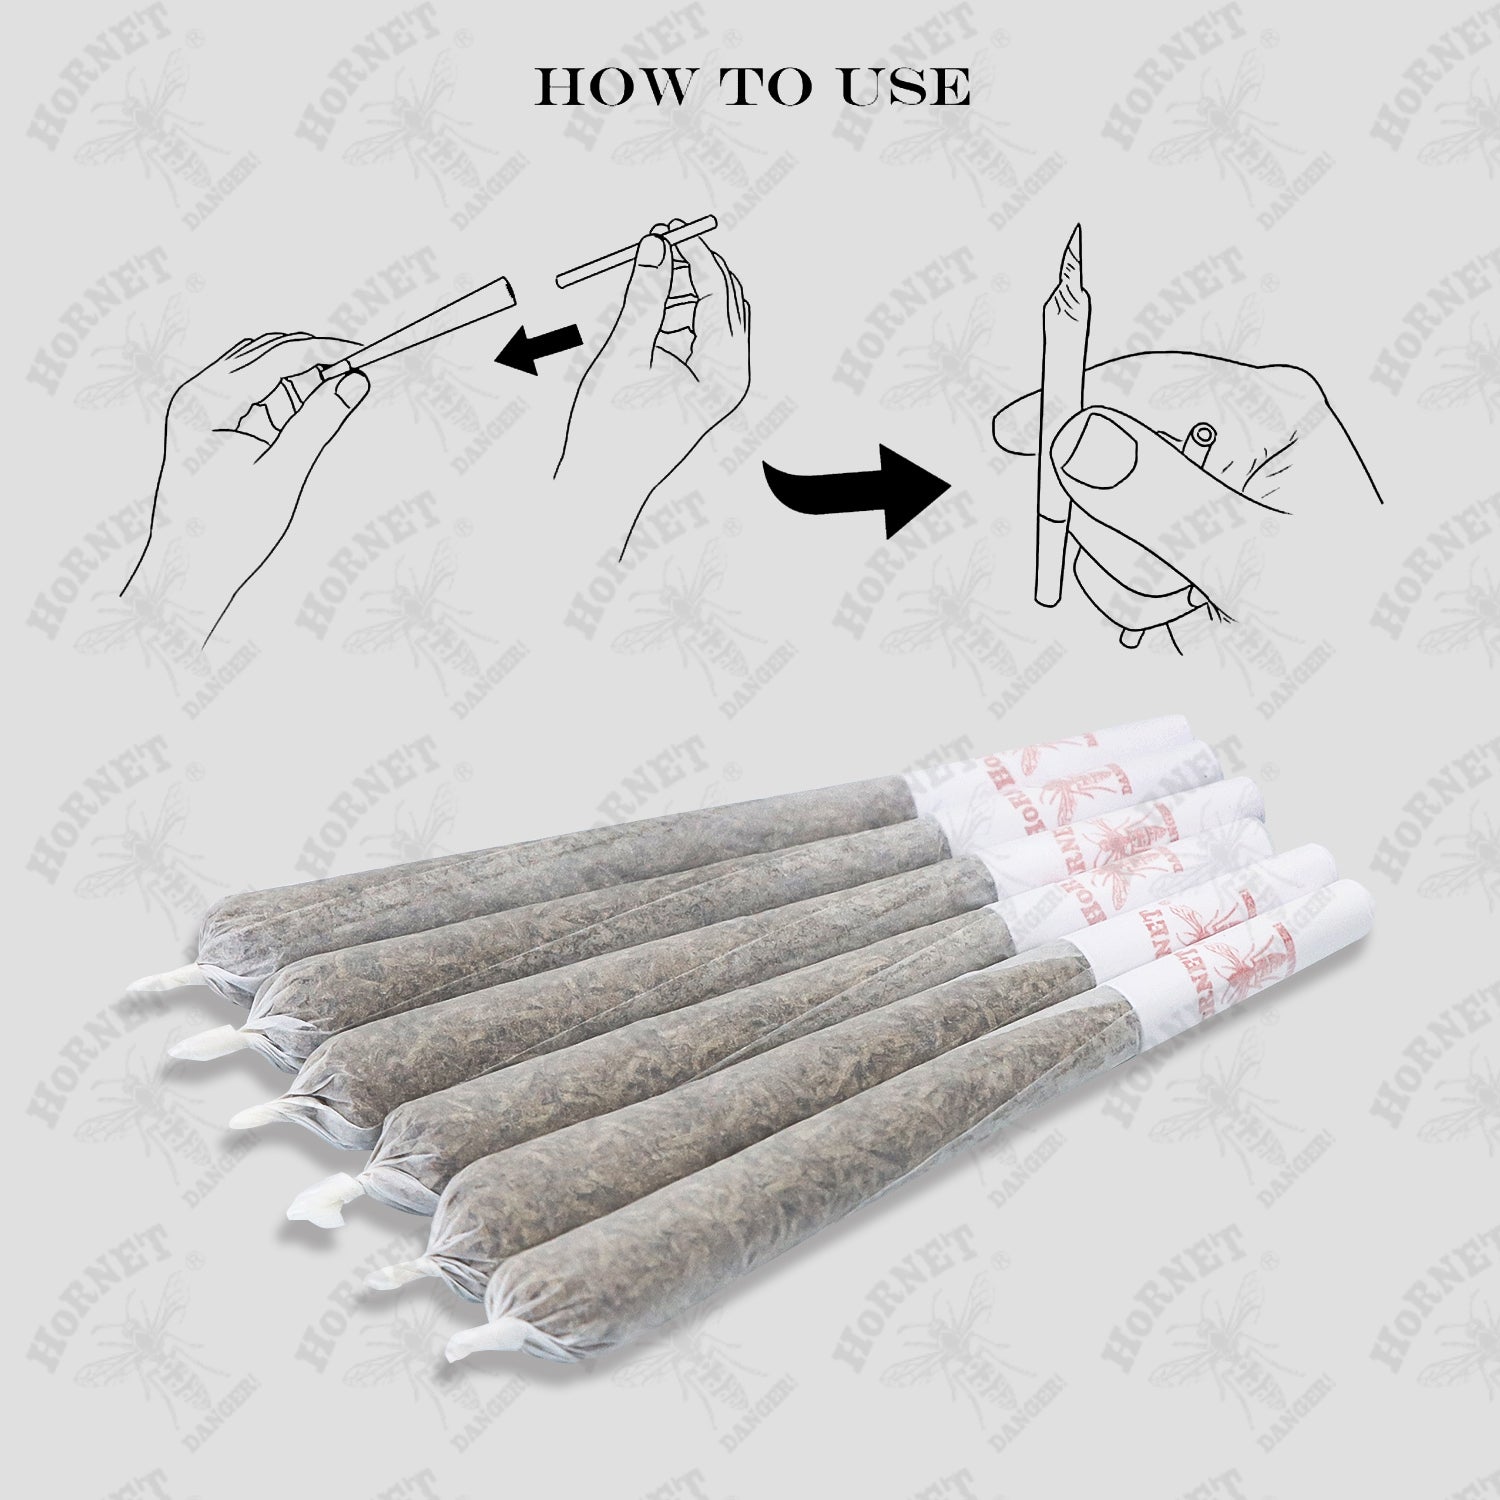 HORNET King Size White Pre Rolled Cones, Organic Rolling Cones With Tips, Slow Burning Pre Rolled Rolling Paper, 100 Pack